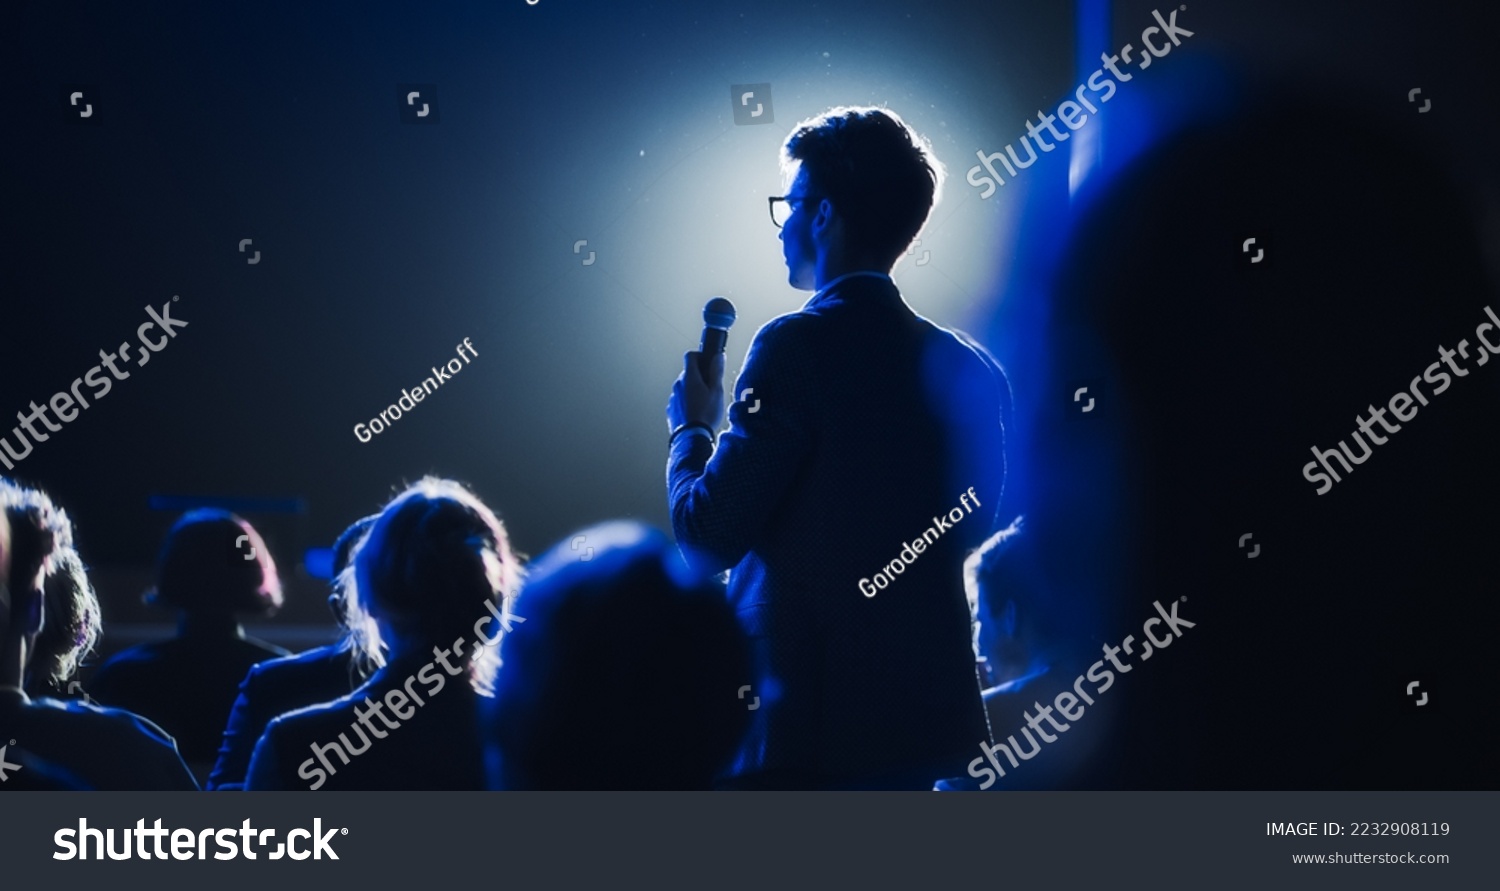 Male Asking a Question to a Speaker During a Q and A Session at an International Tech Conference in a Dark Crowded Auditorium. Young Specialist Expressing an Opinion During a Global Business Summit. #2232908119